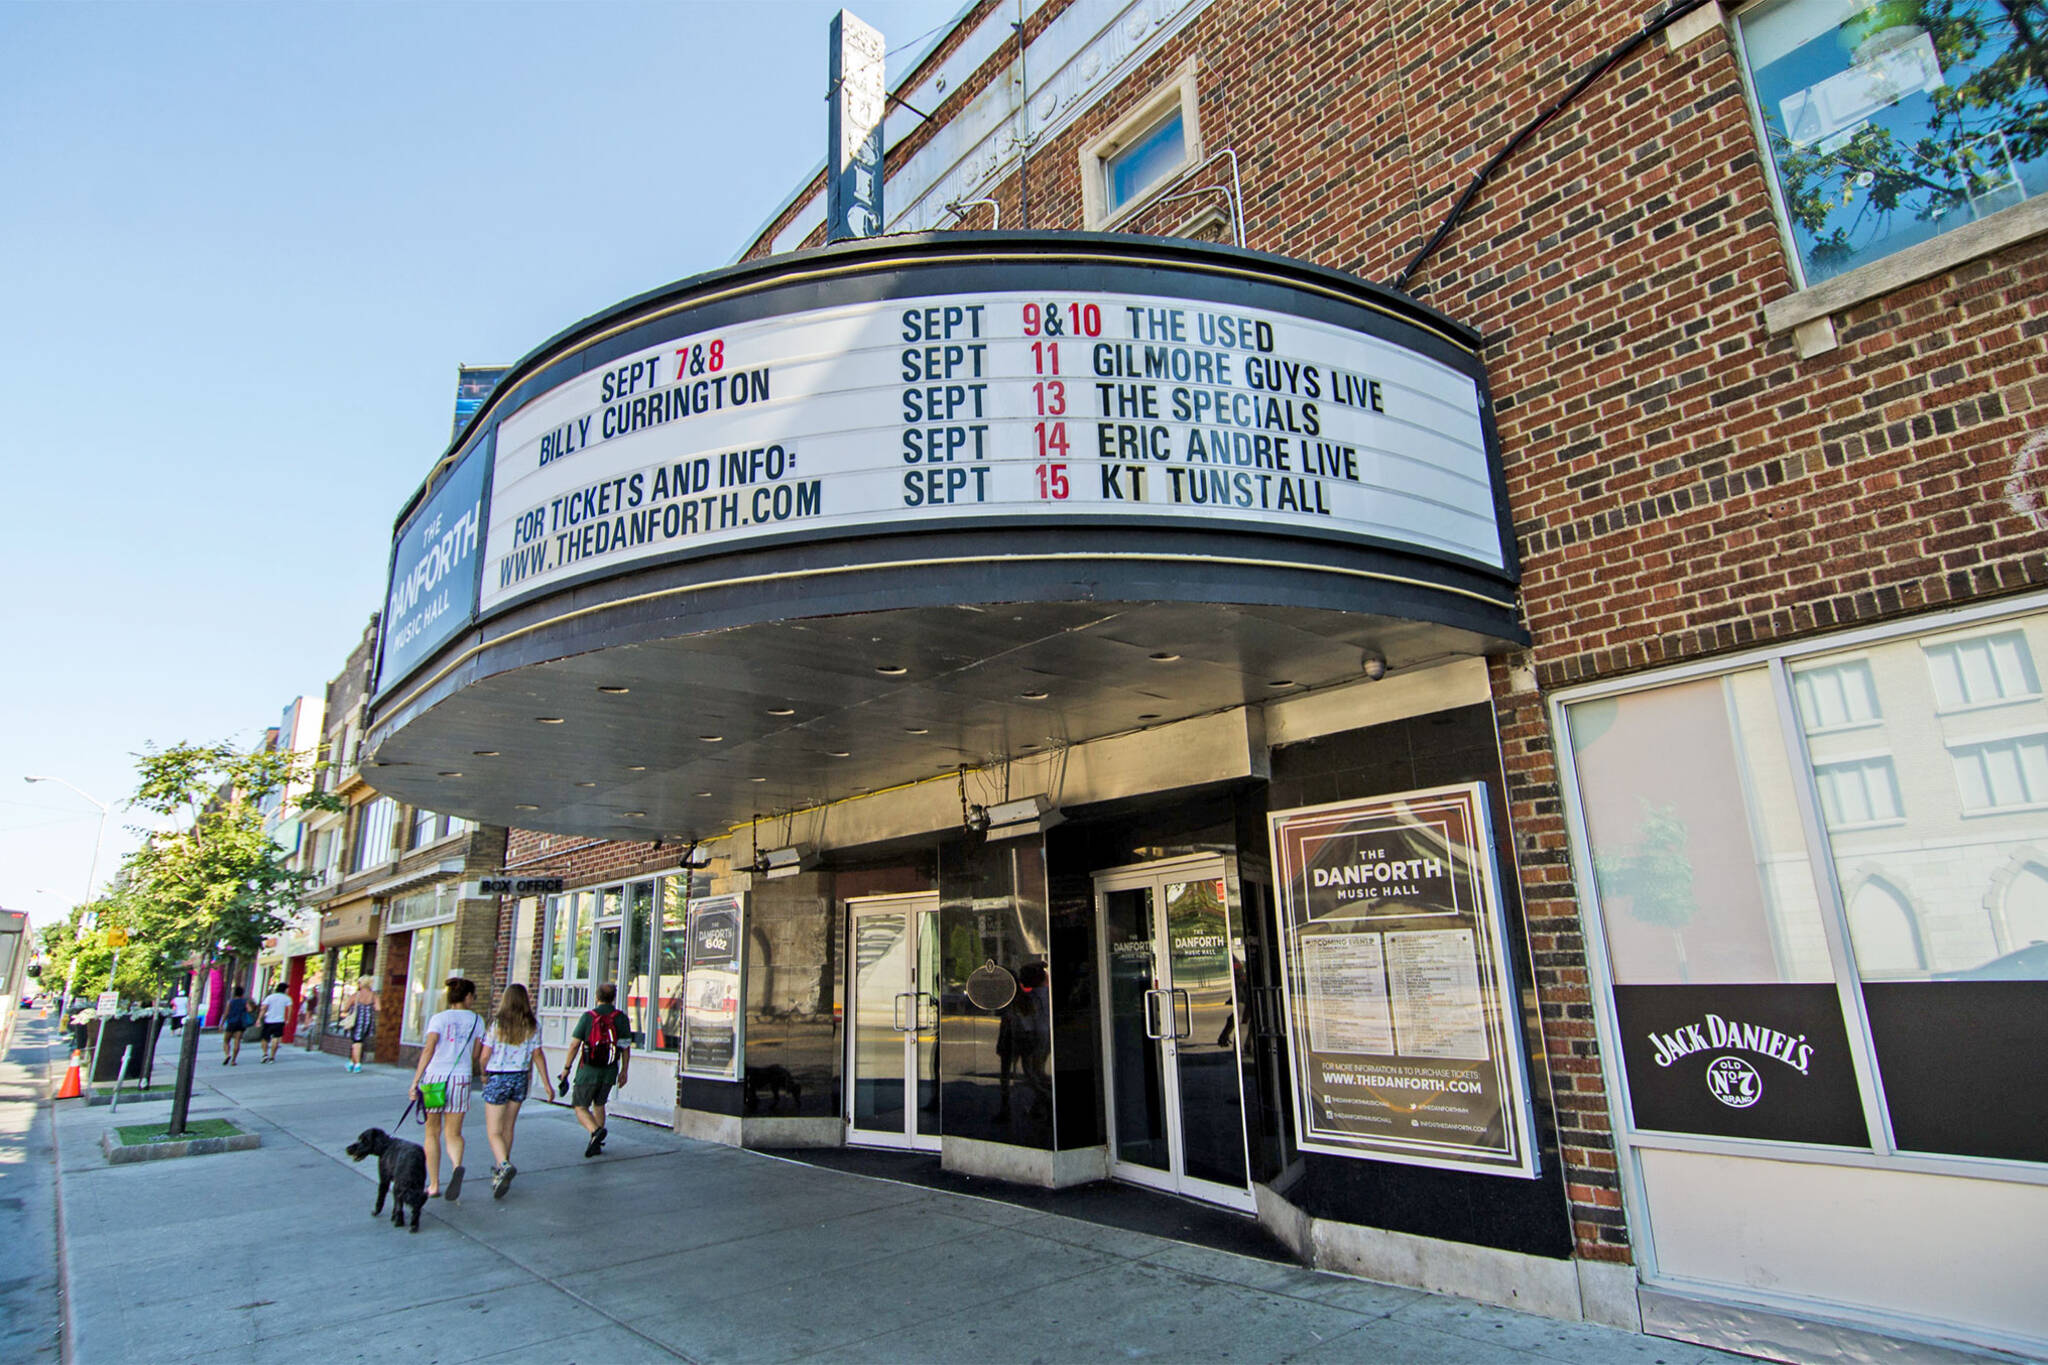 The history of the Danforth Music Hall in Toronto